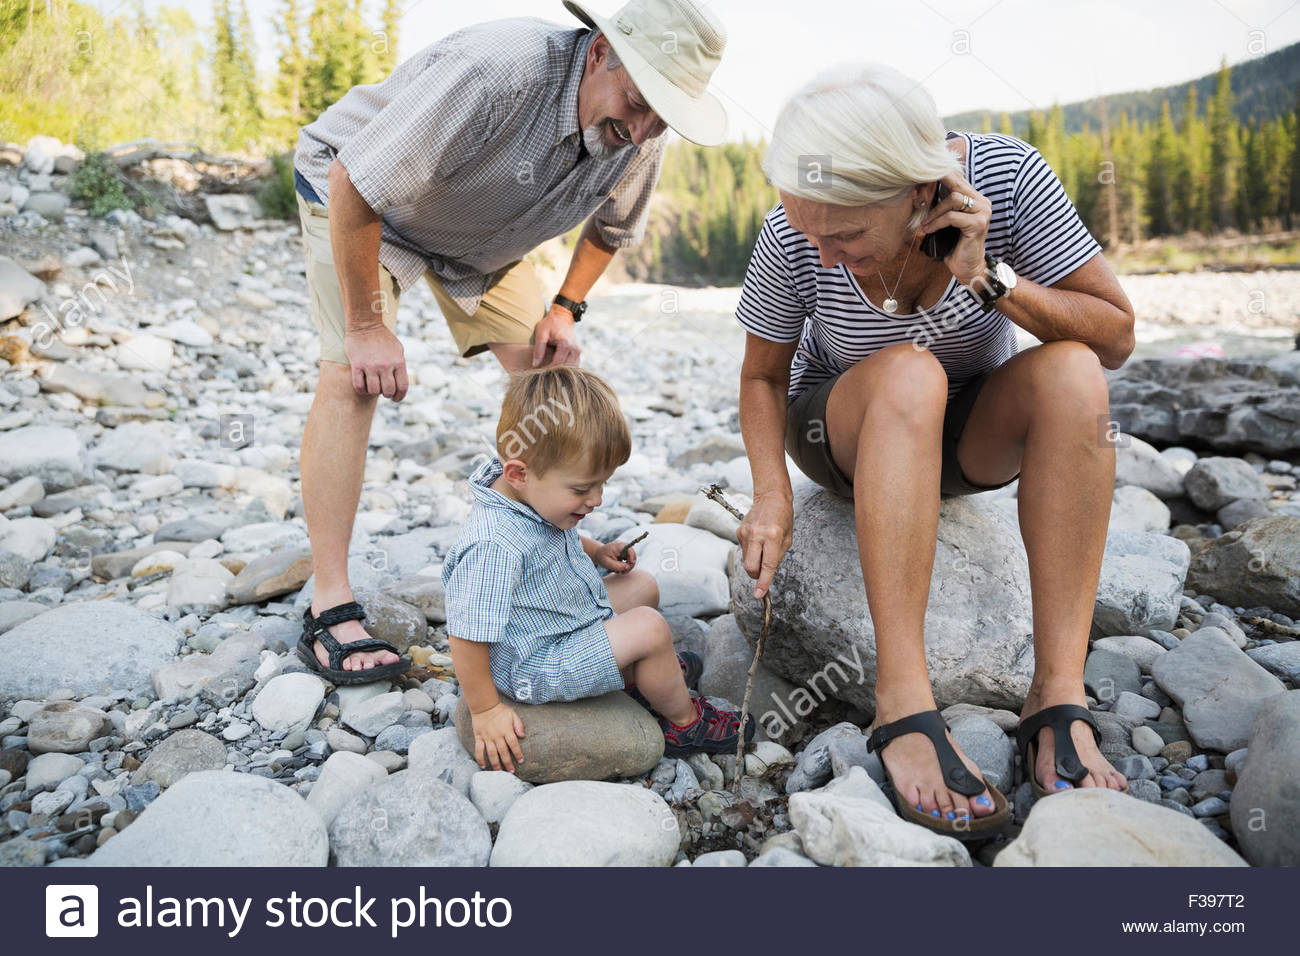 Grandparents and grandson playing in rocks Stock Photo